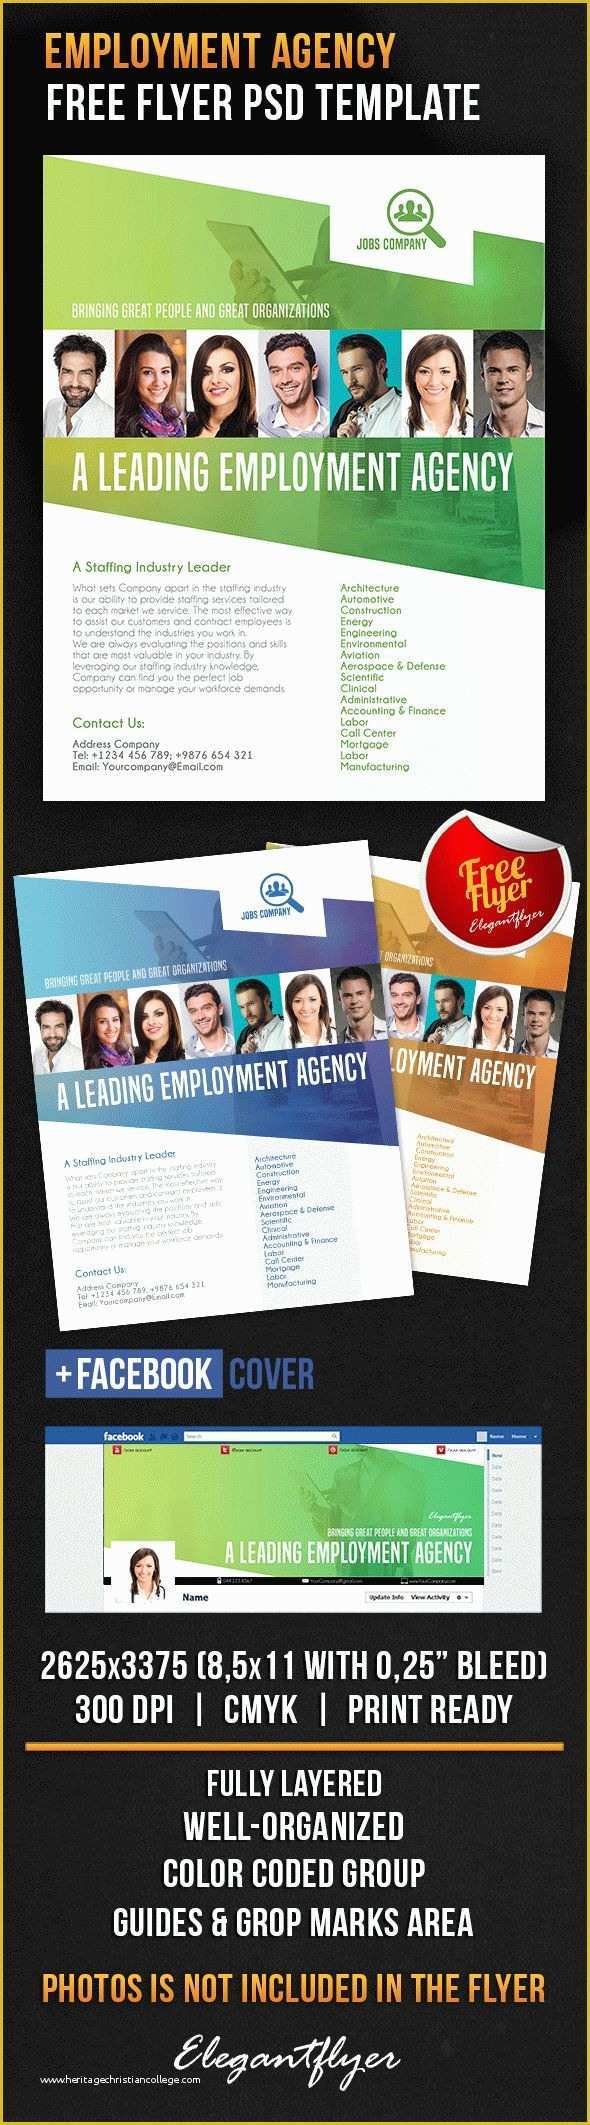 Facebook Ad Template Psd Free Of Free Psd Flyer Template Employment Agency Cover